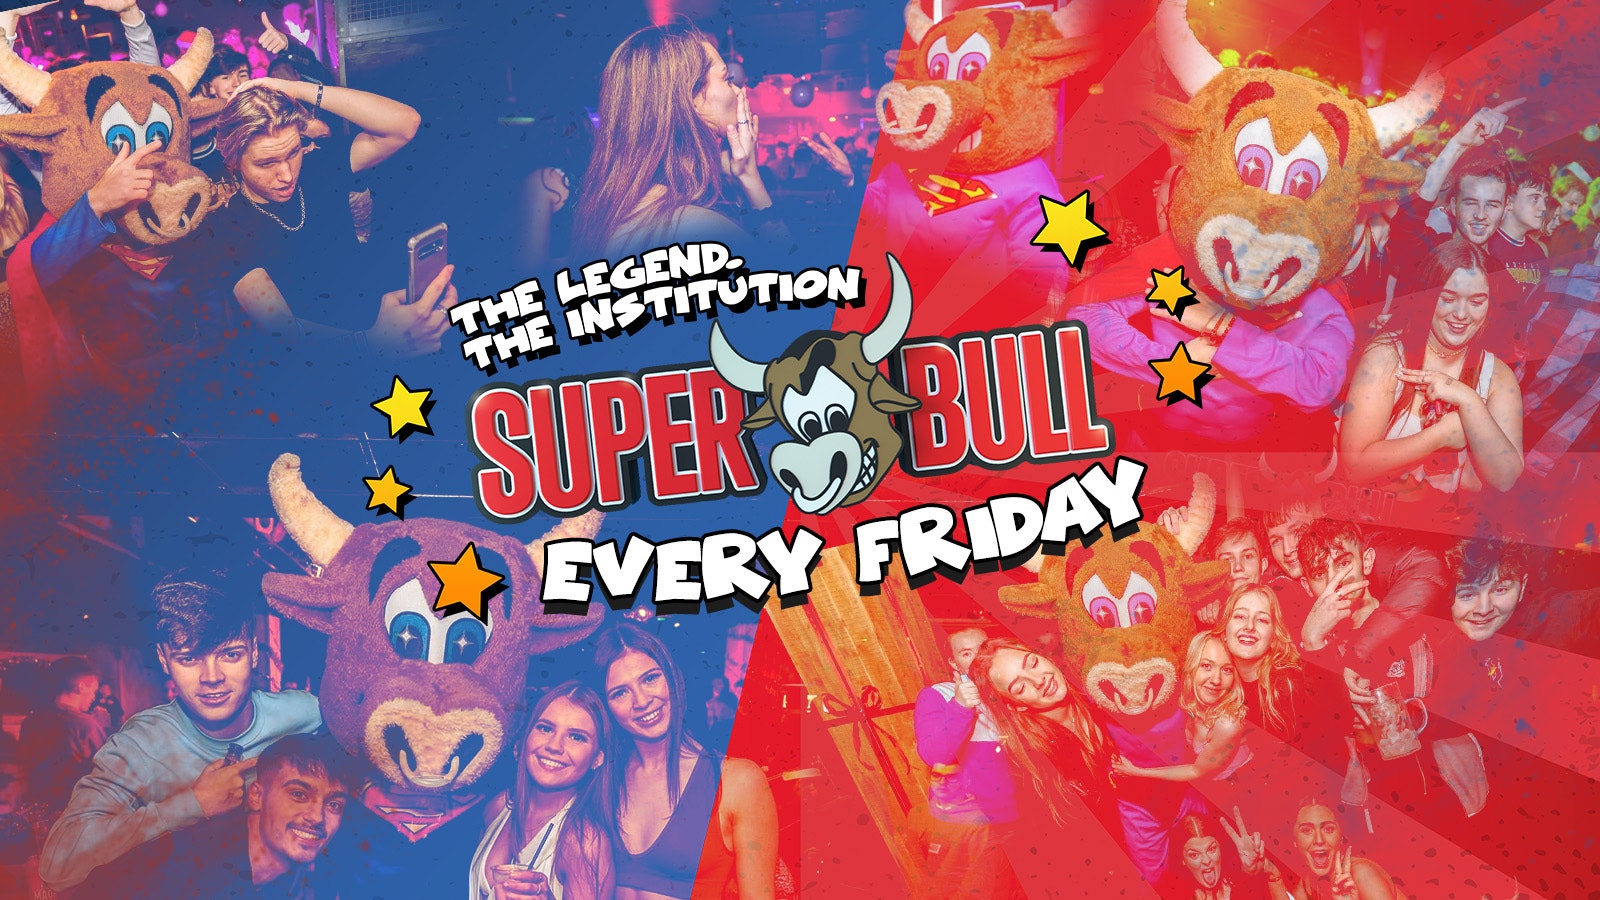 The Superbull – The Legend. The Institution – Fri 24th May